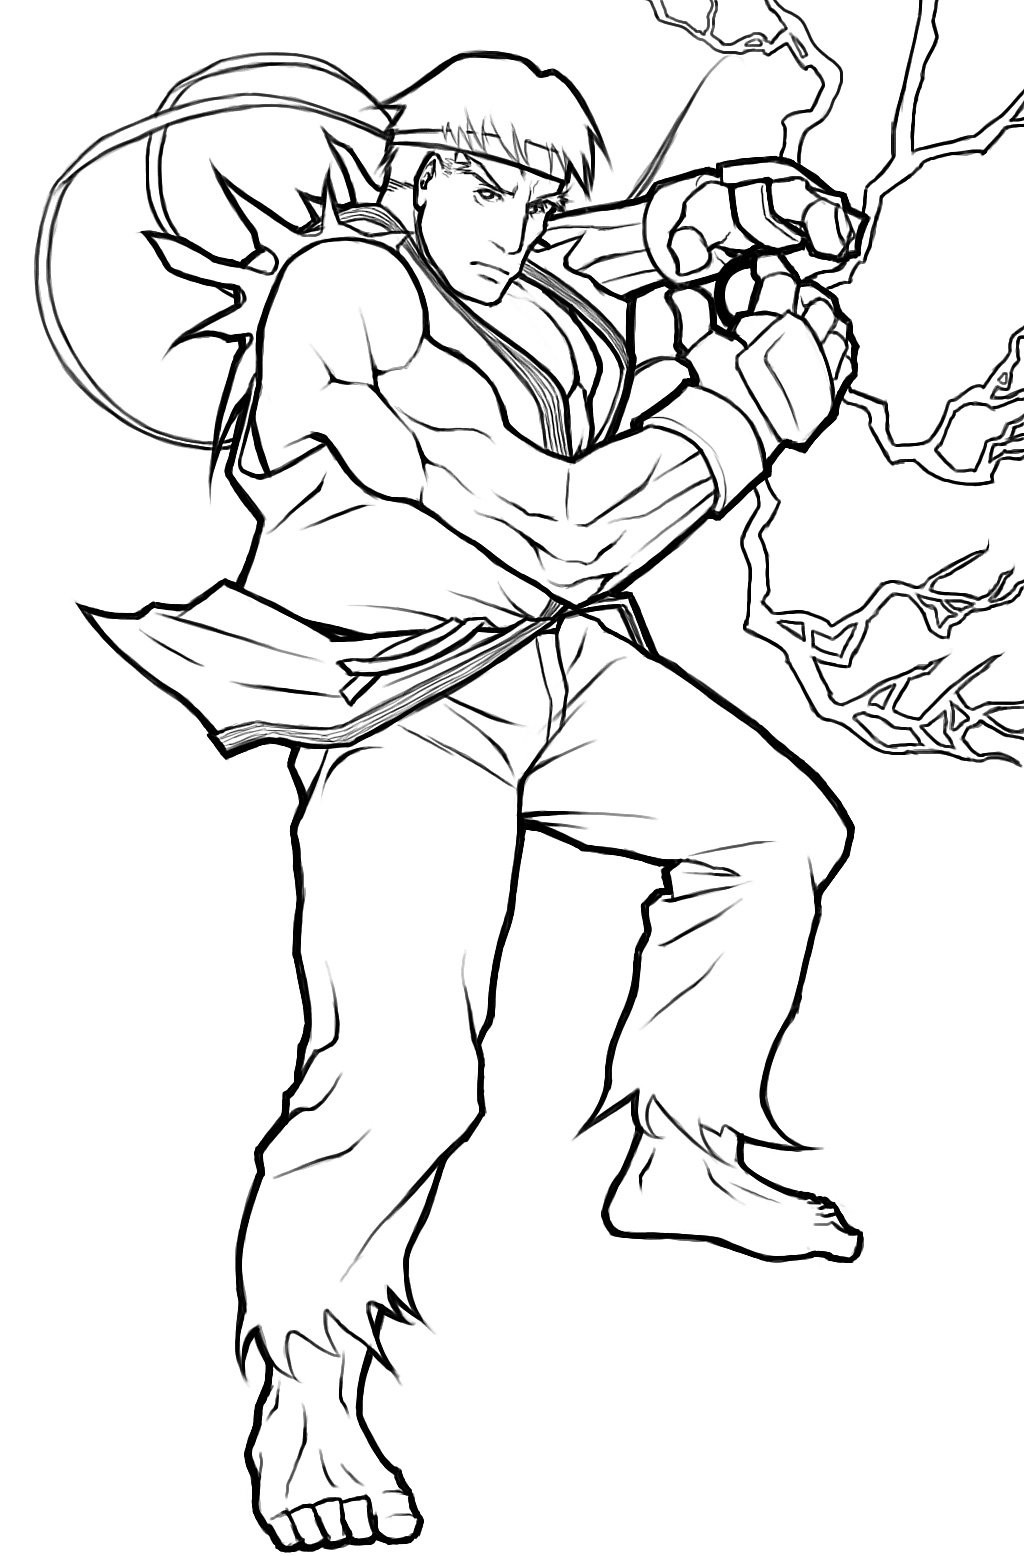 Street Fighter Ryu Coloring Page | tgkr.co